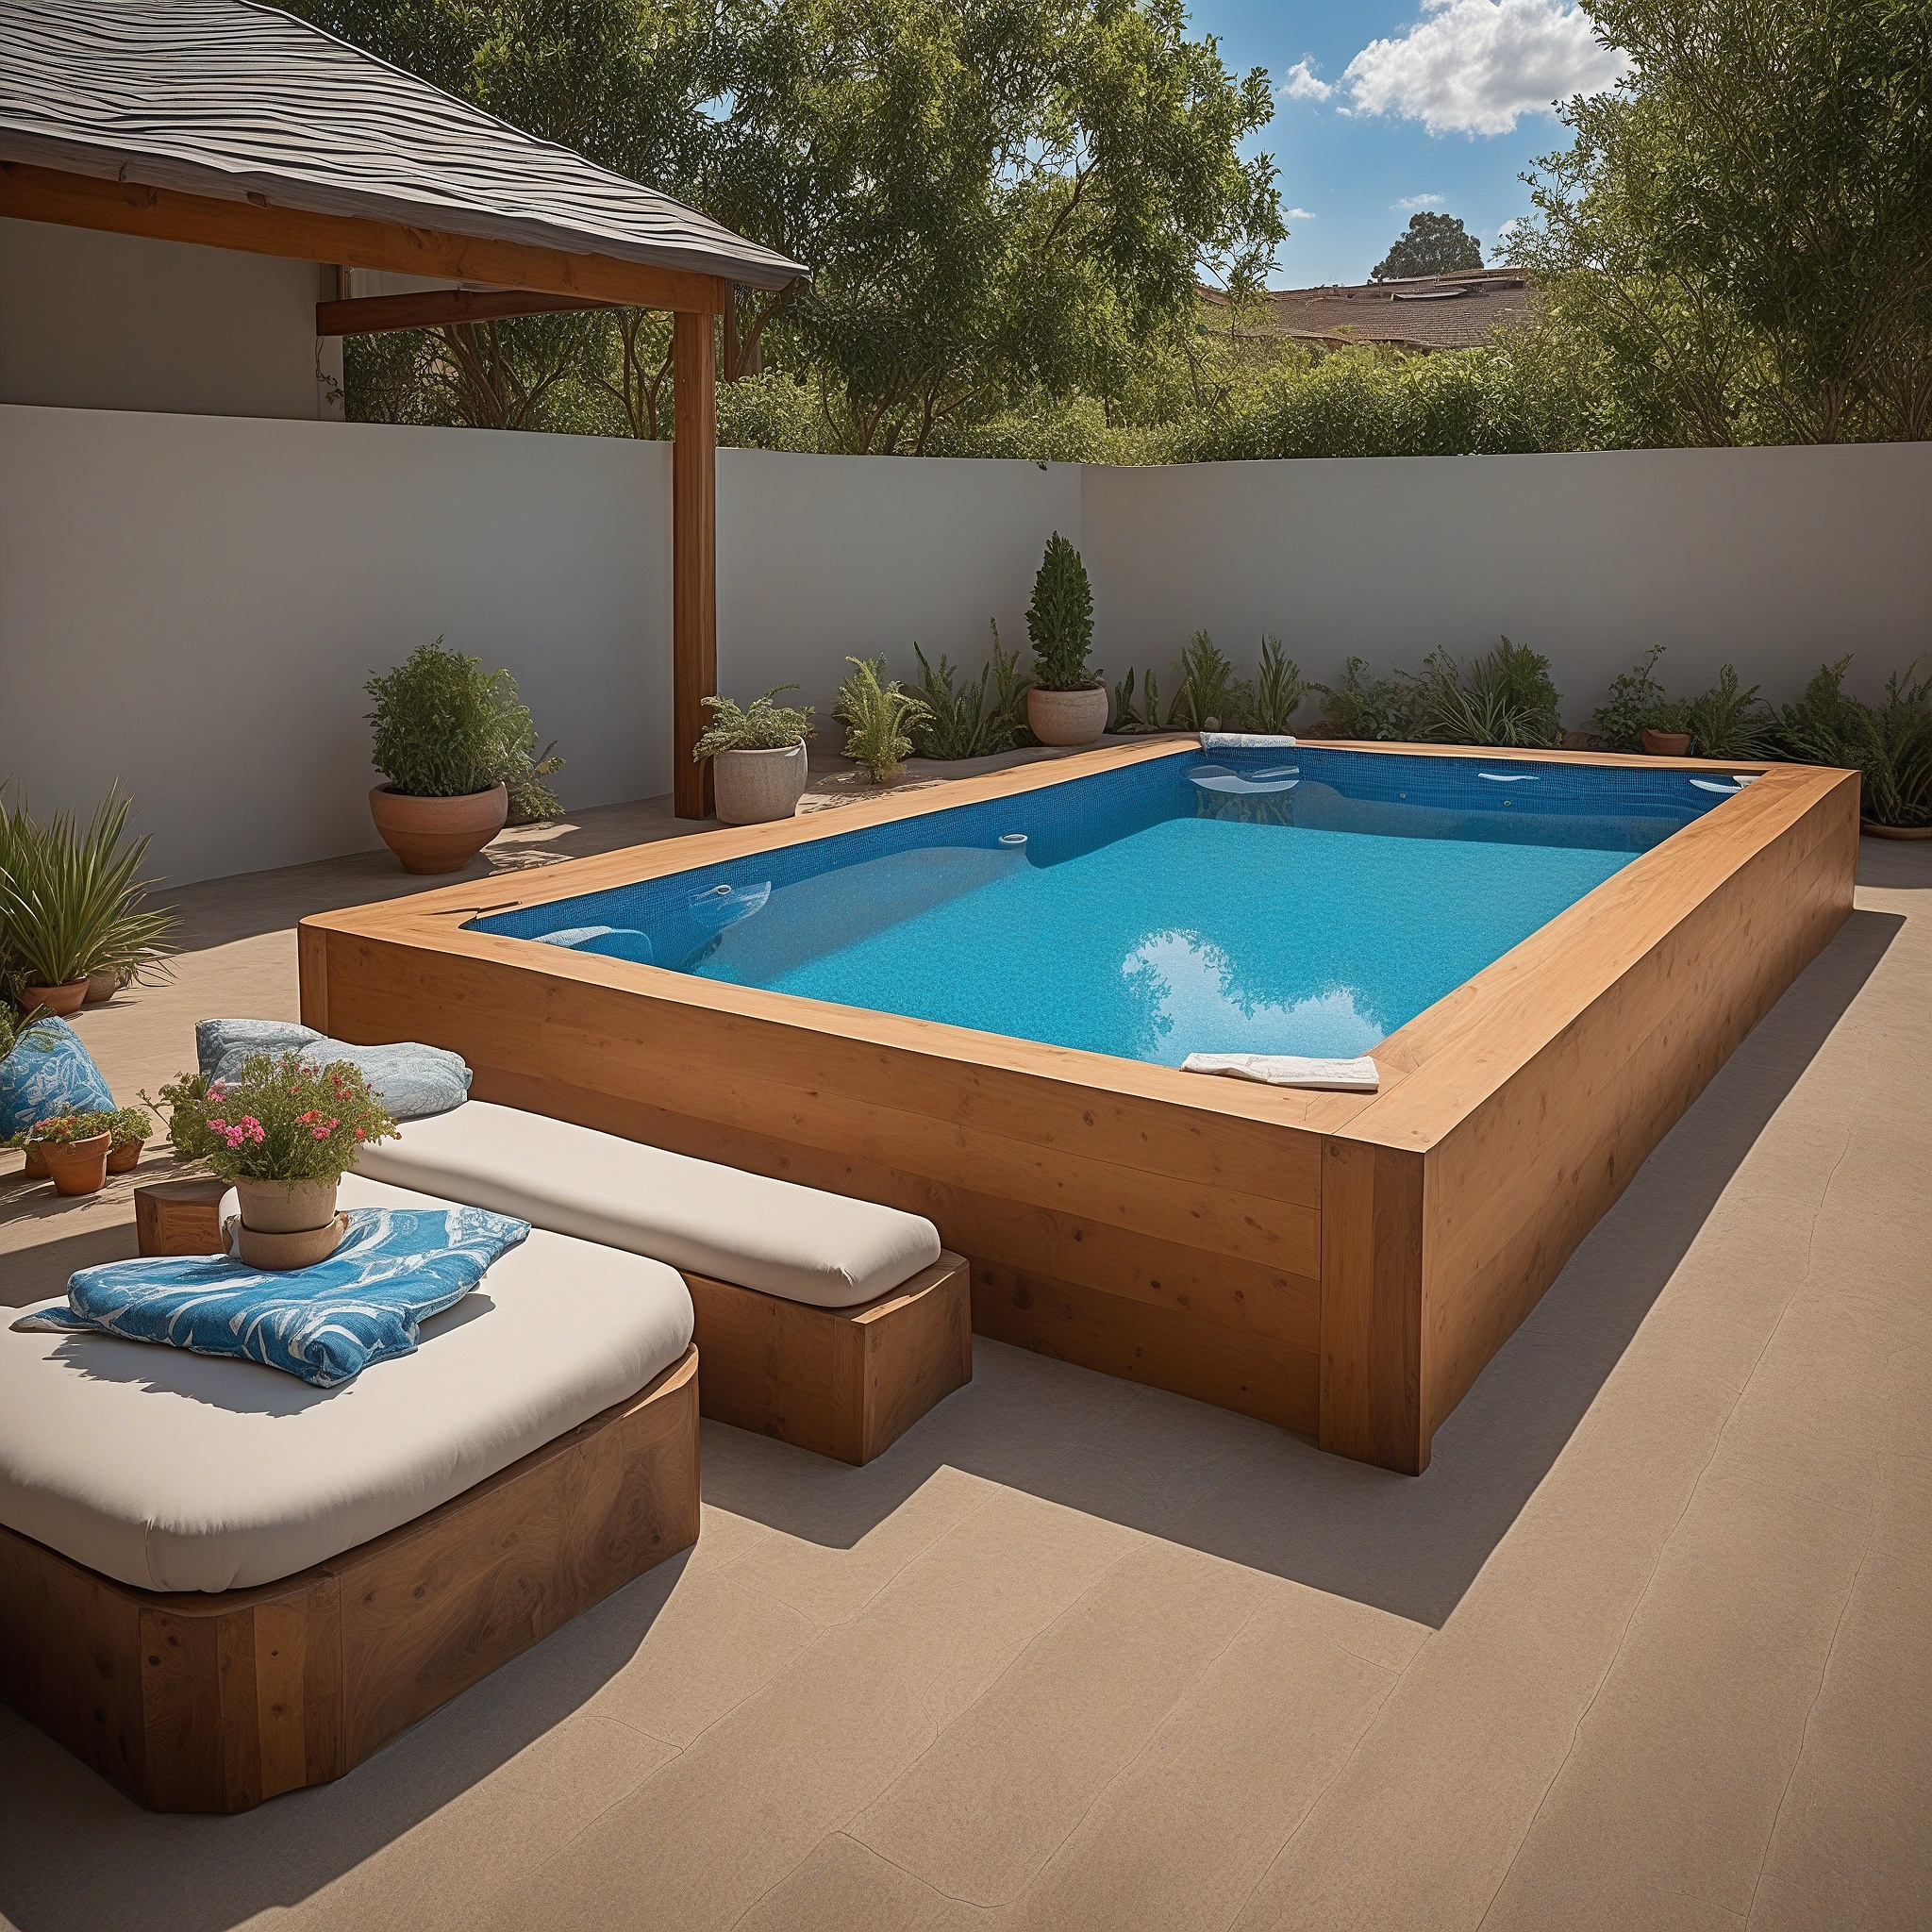 Above-ground Pool With a Resin Deck and Built-in Storage Benches